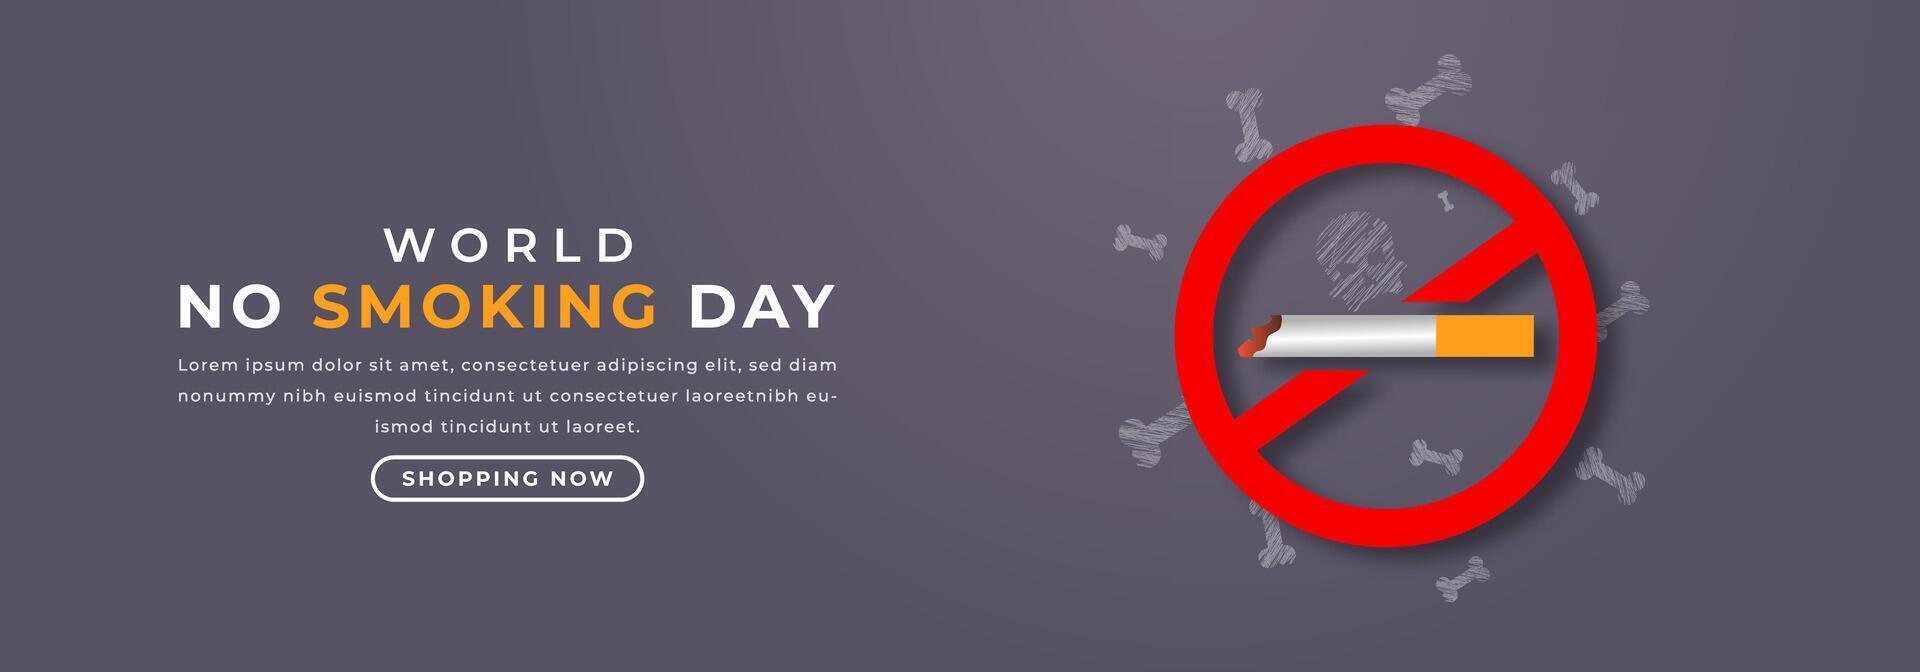 No Smoking day Paper cut style Vector Design Illustration for Background, Poster, Banner, Advertising, Greeting Card